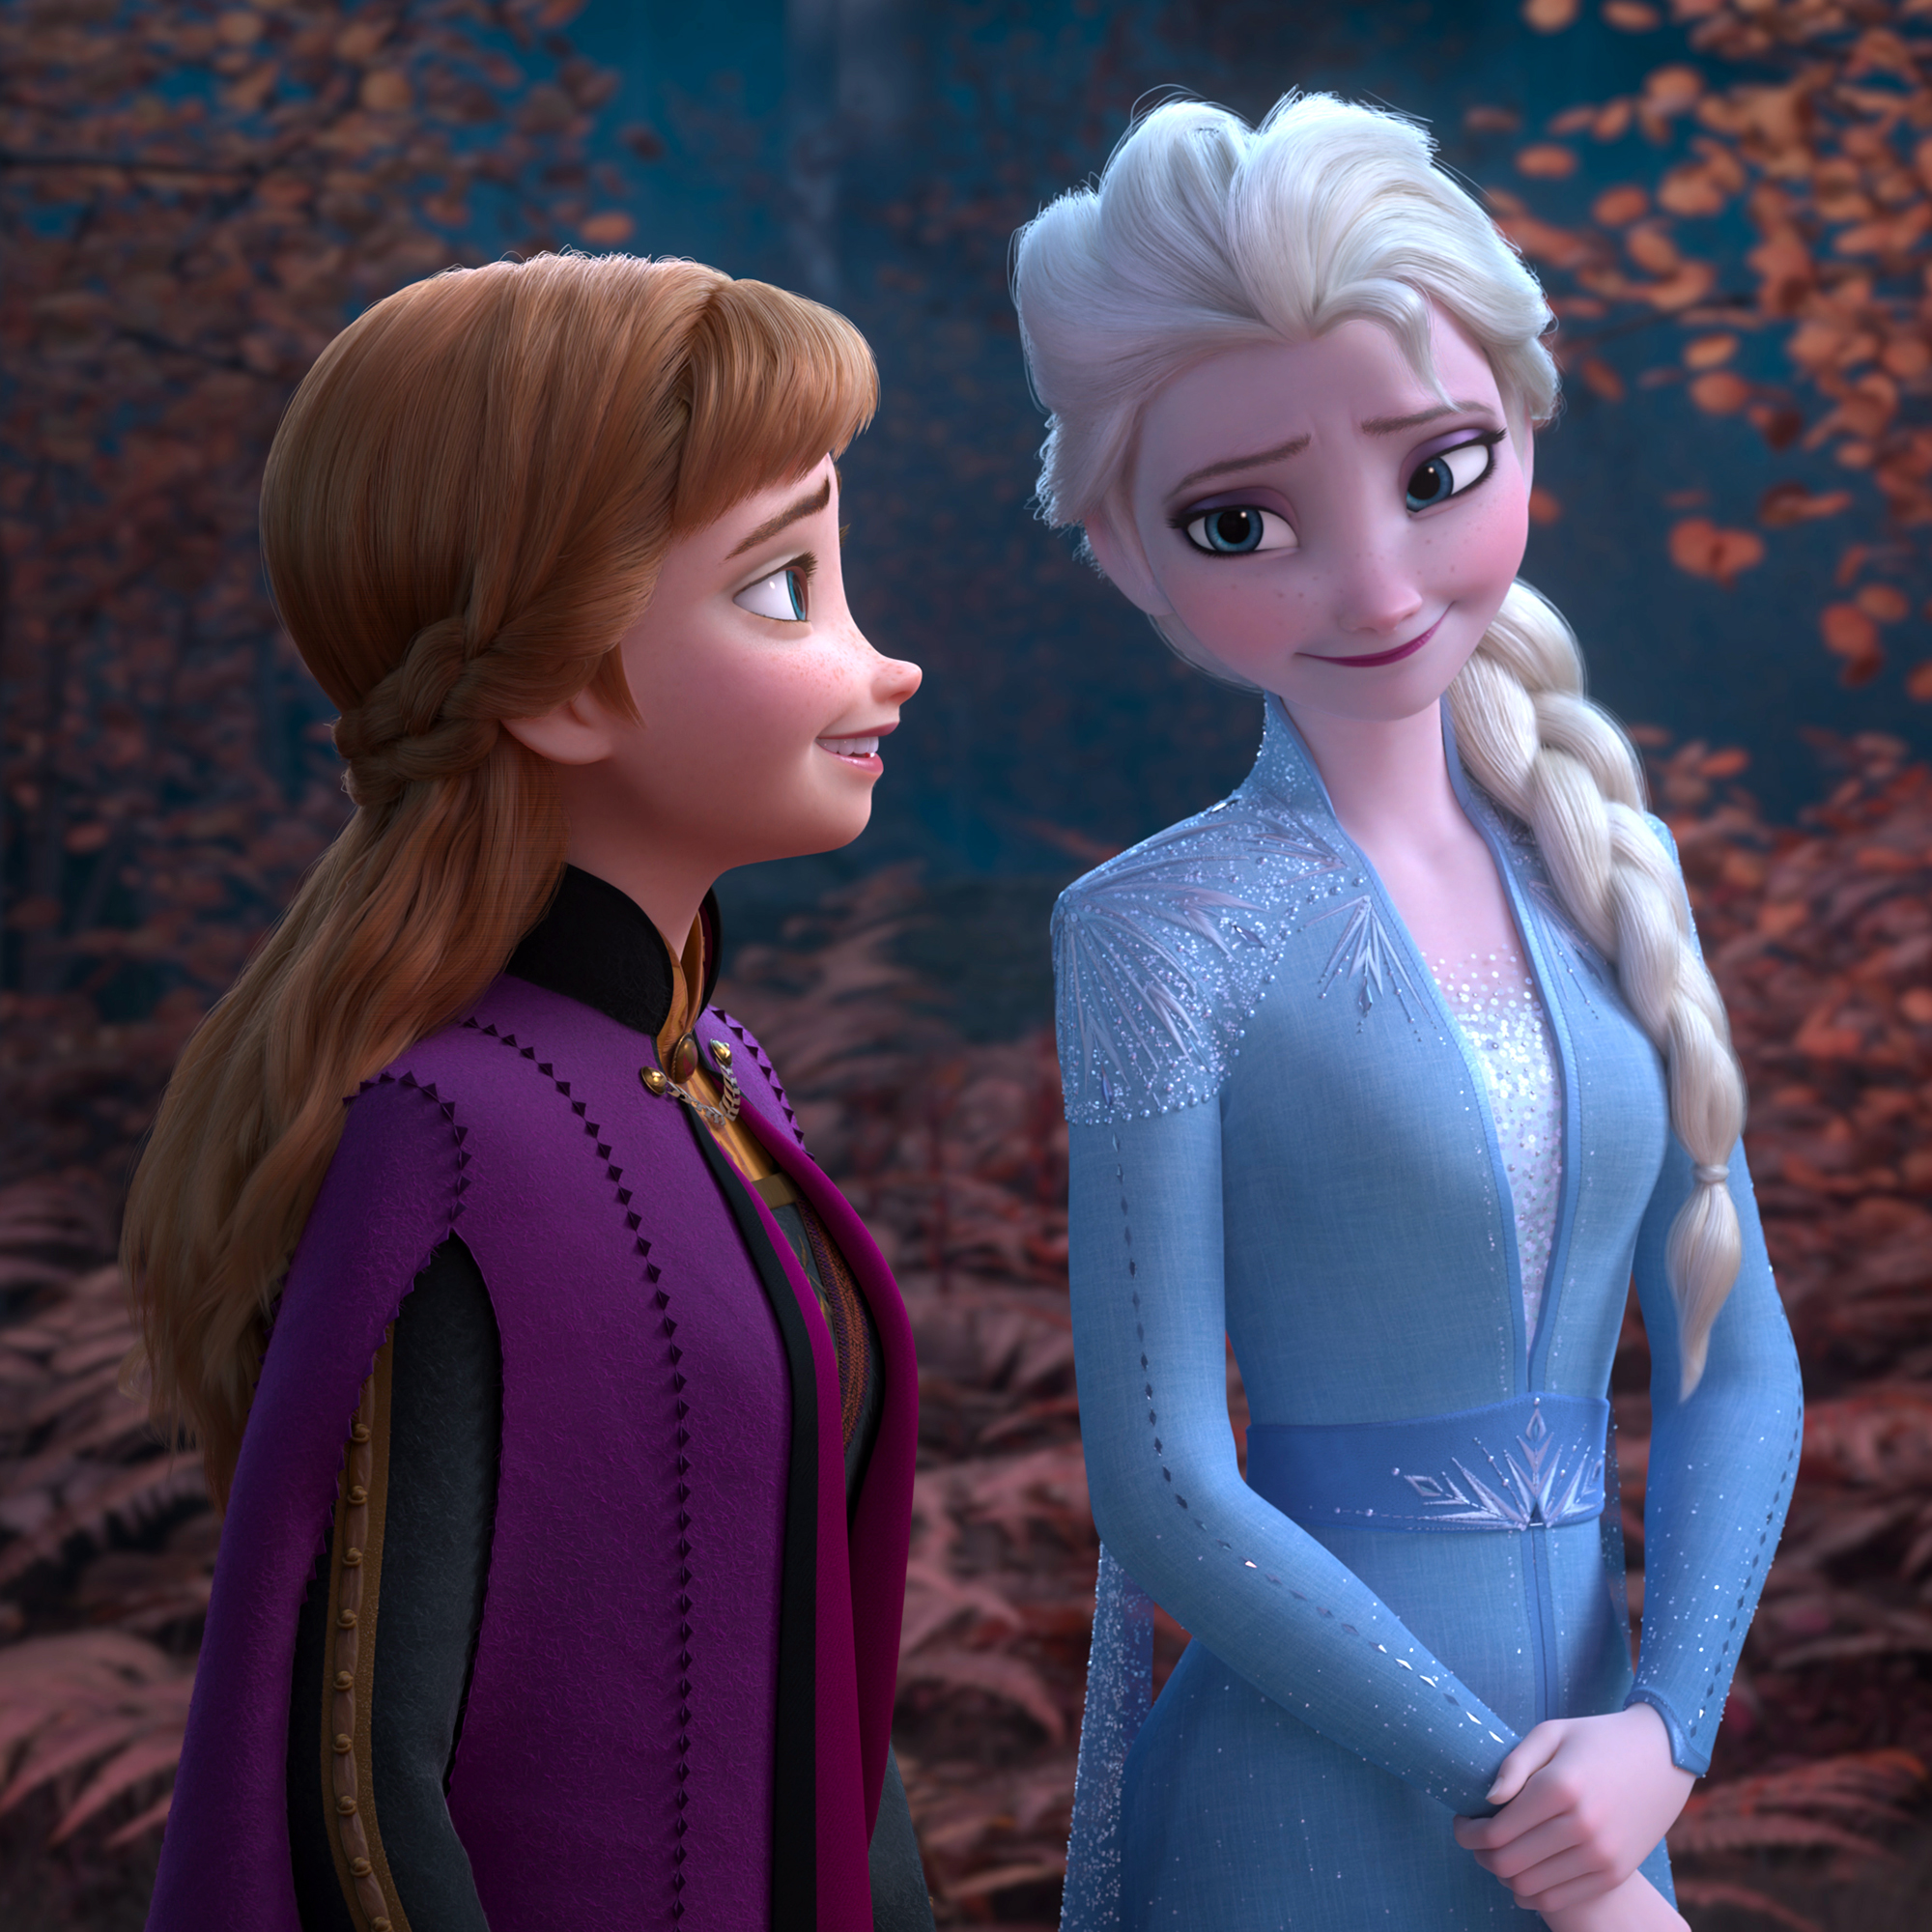 Frozen 2 Embraces Mental And Emotional Health Challenges The Warrior Word